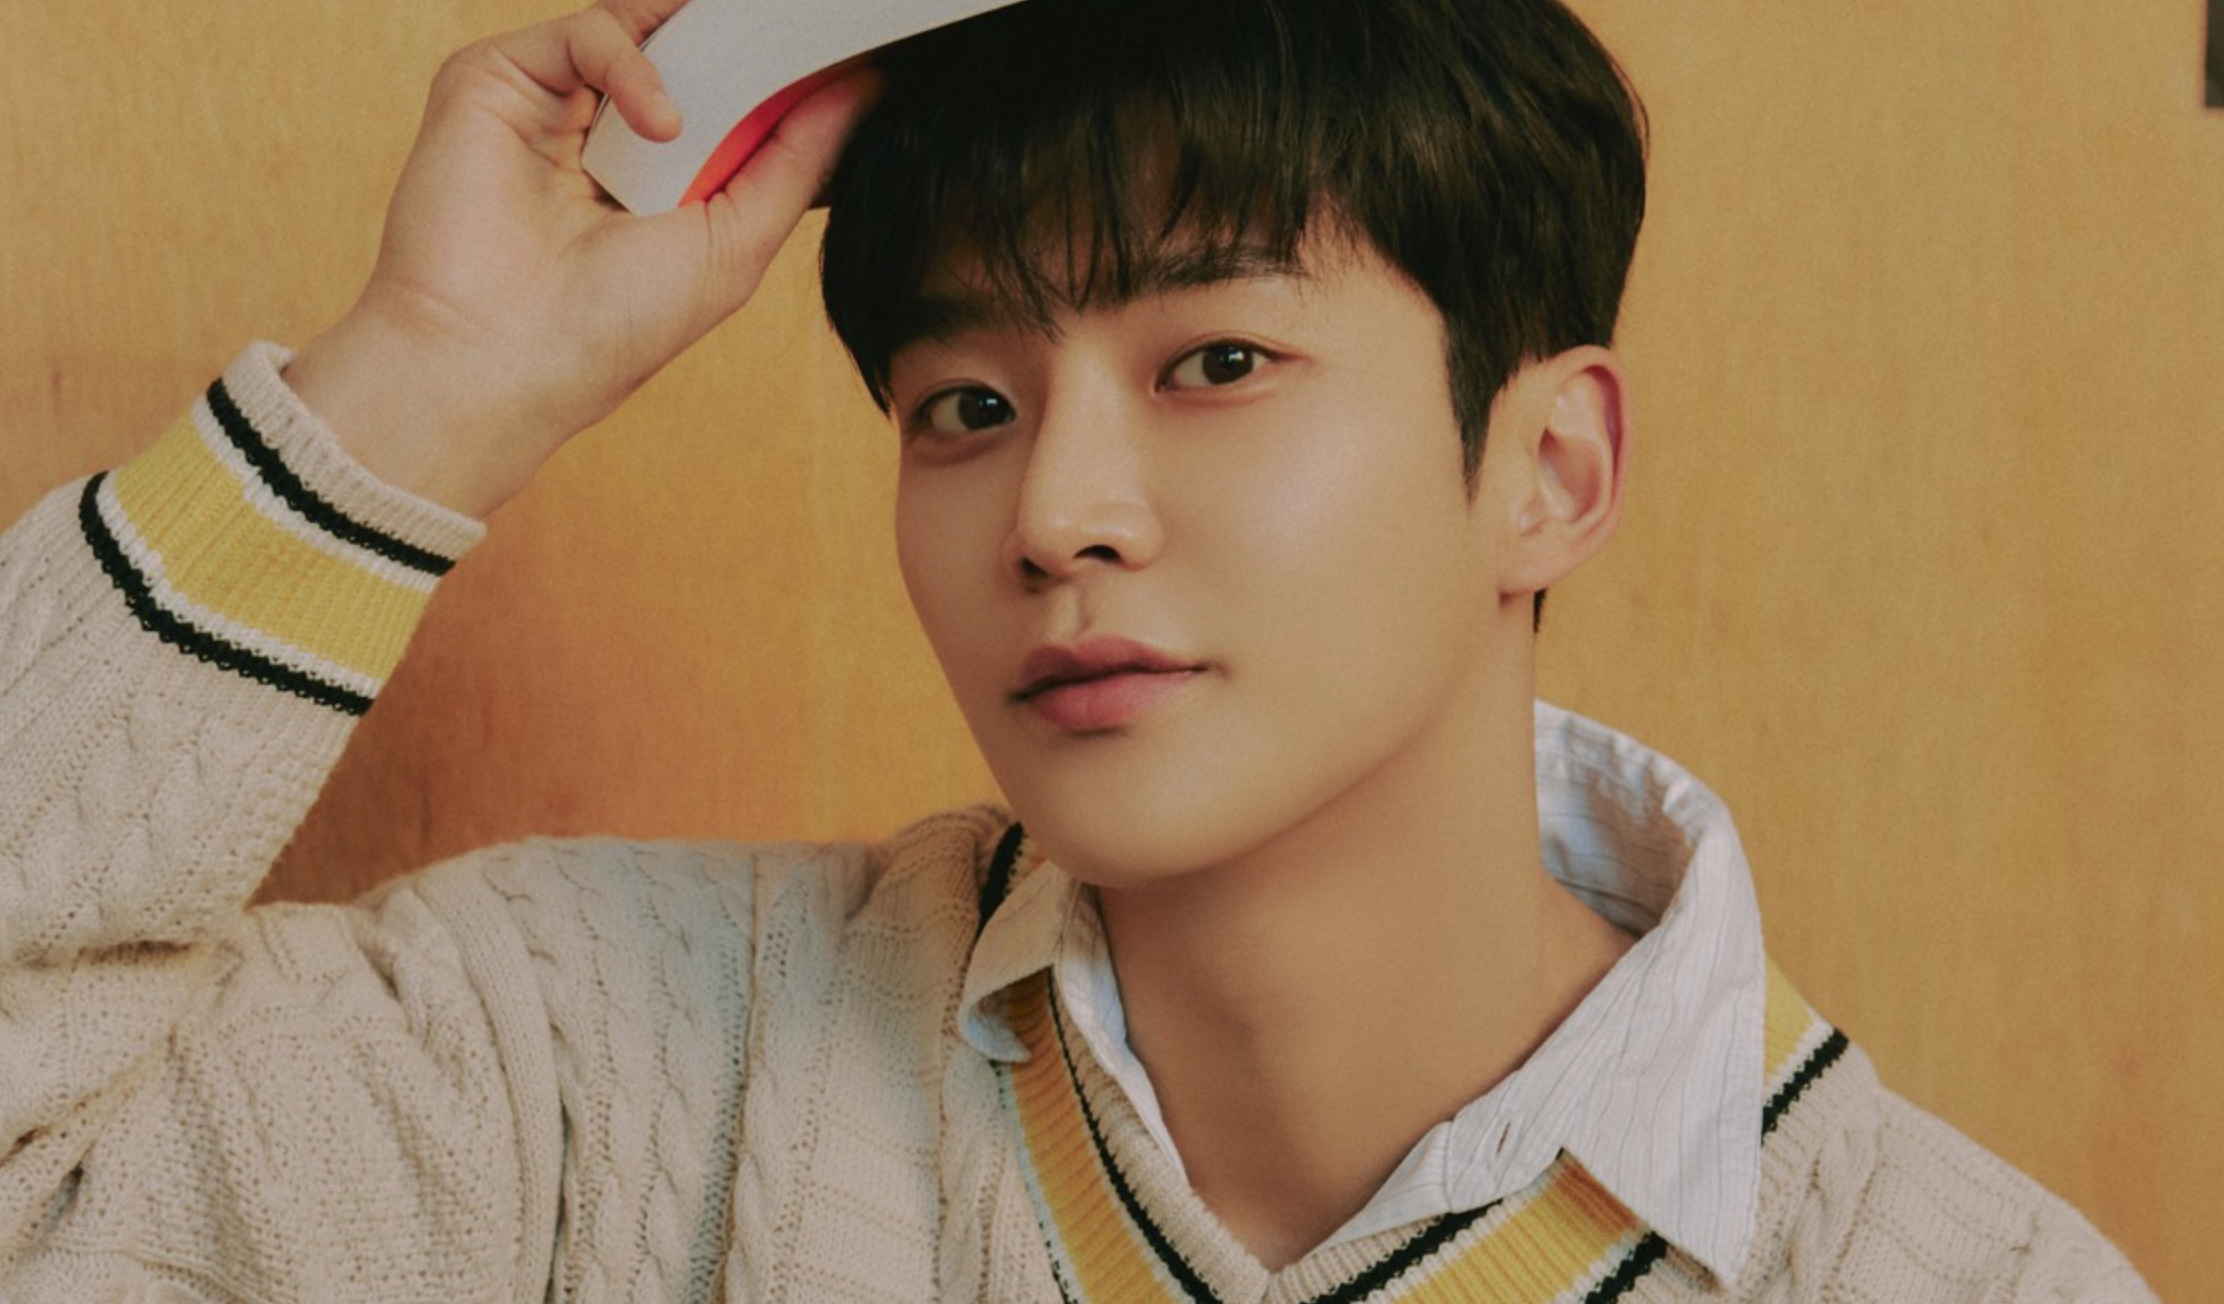 After 7 years with SF9, Rowoon is officially leaving the group to continue pursuing his acting career